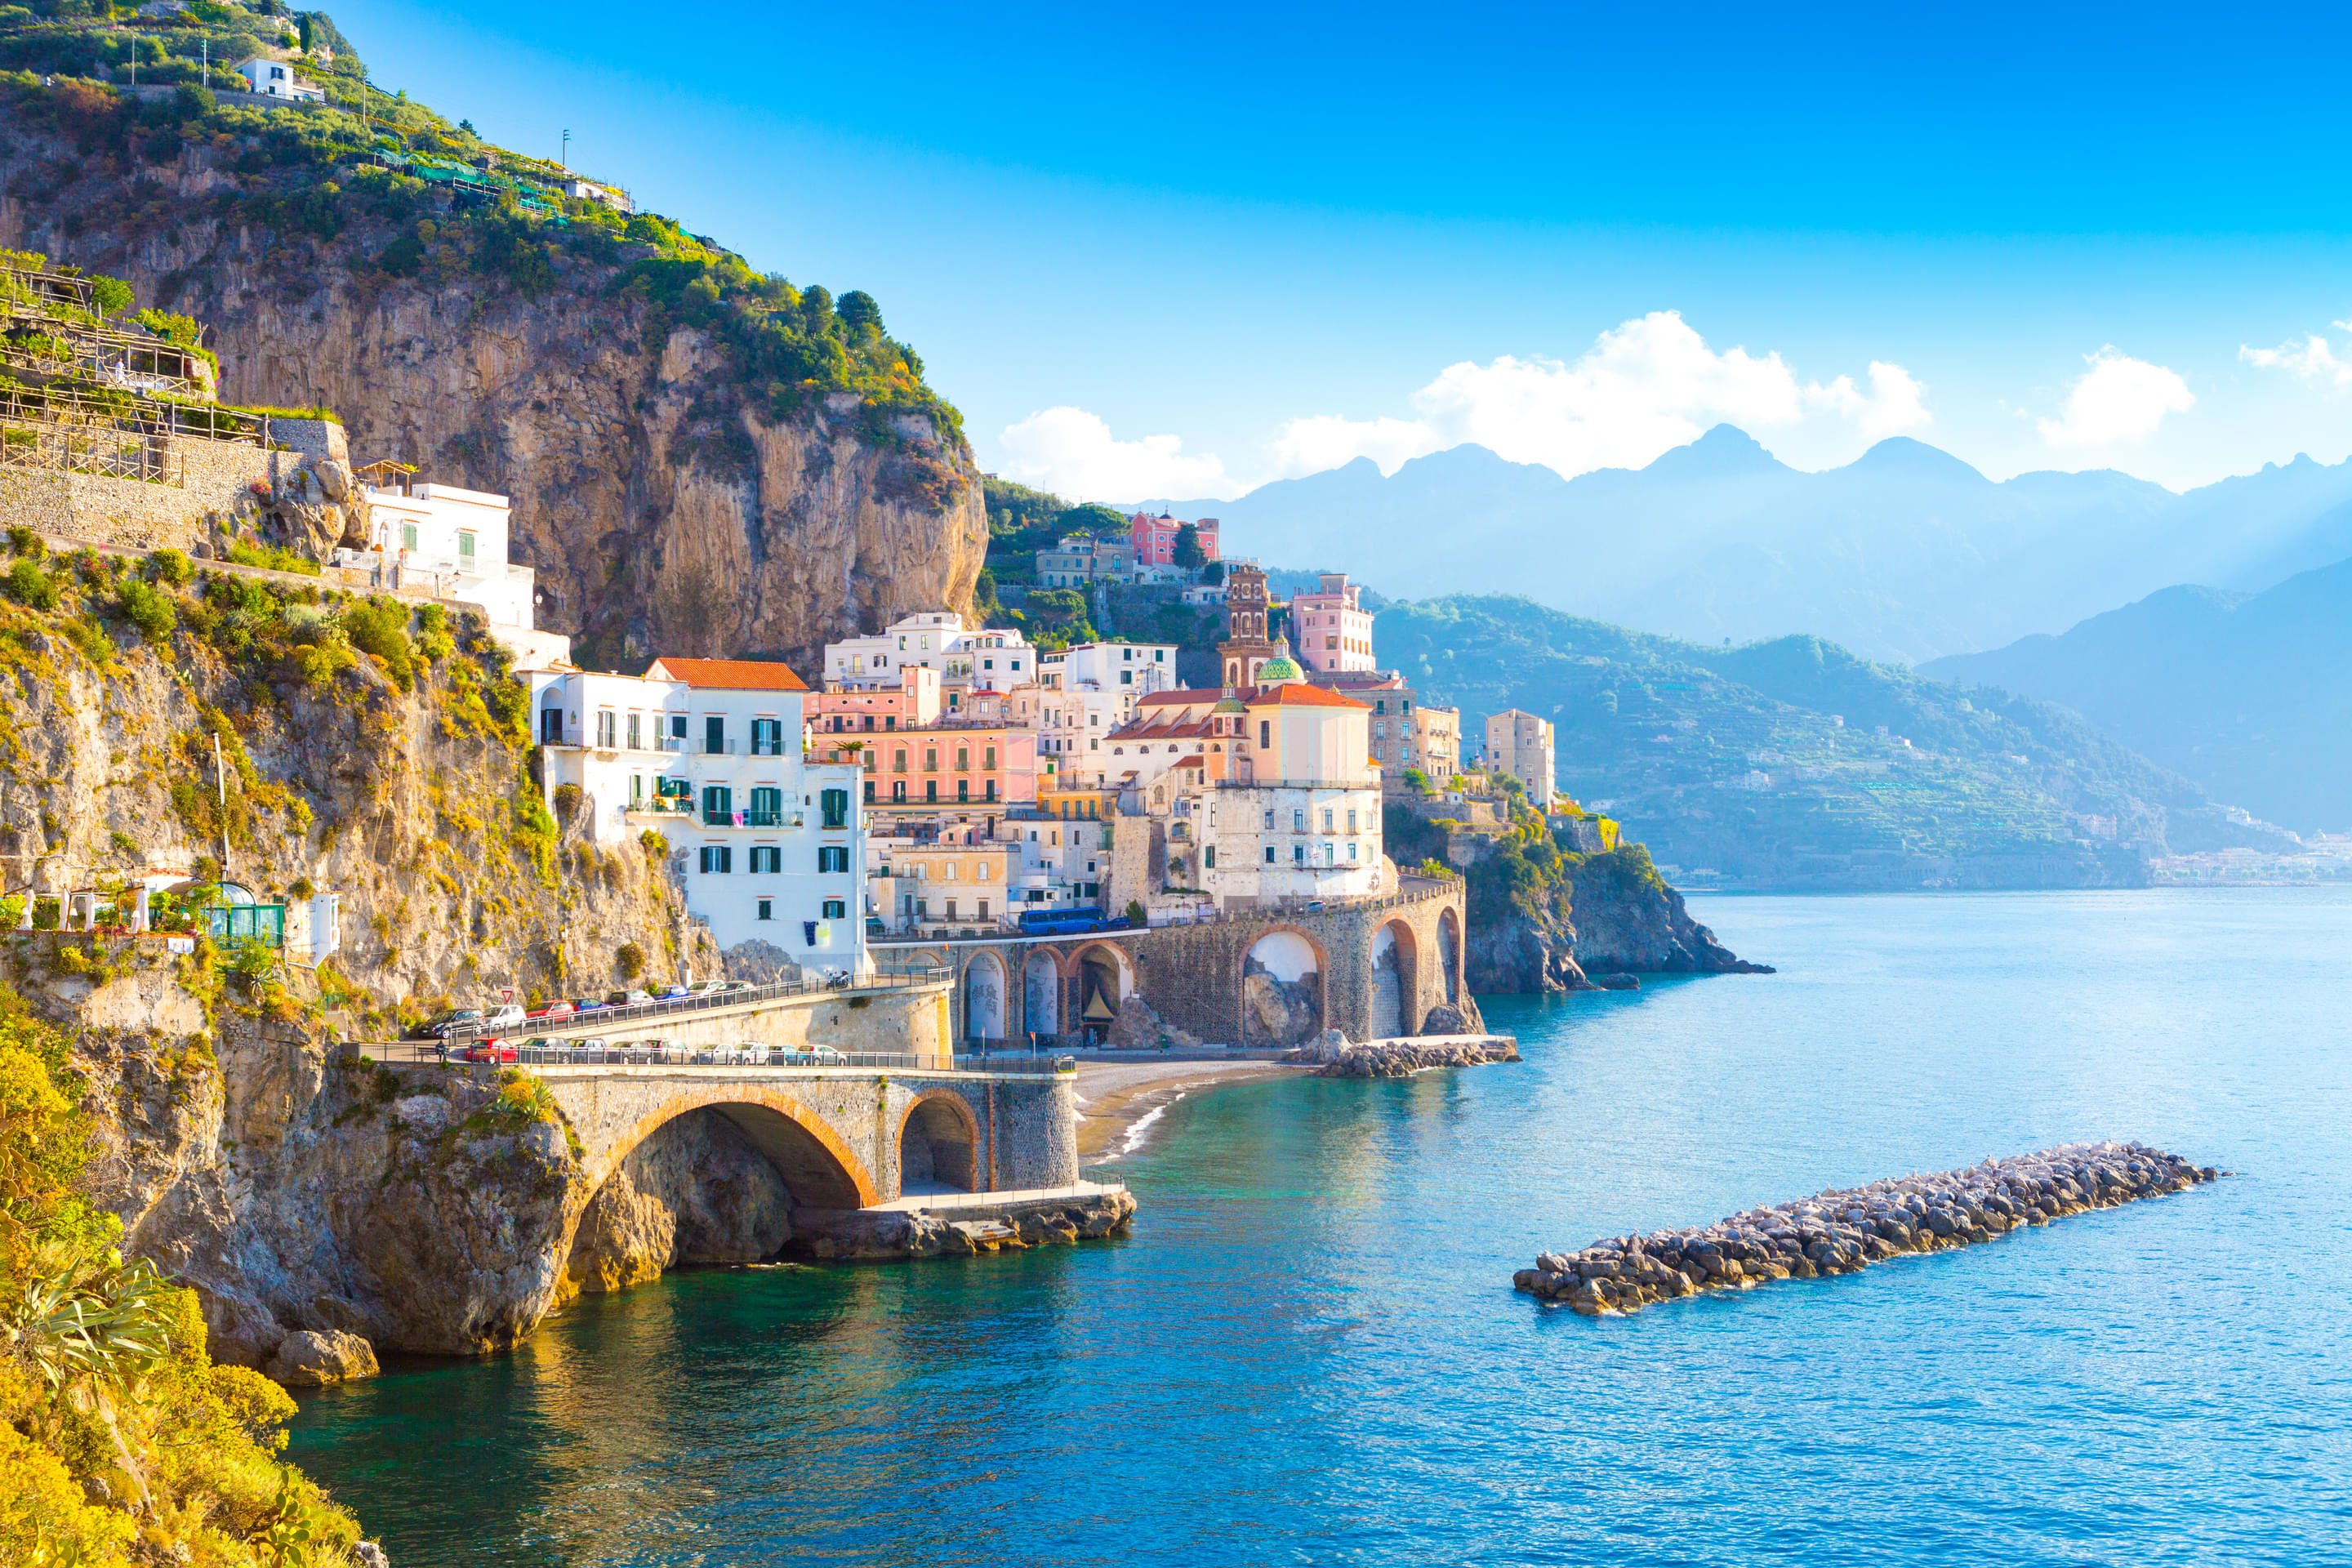 Things to Do in Sorrento